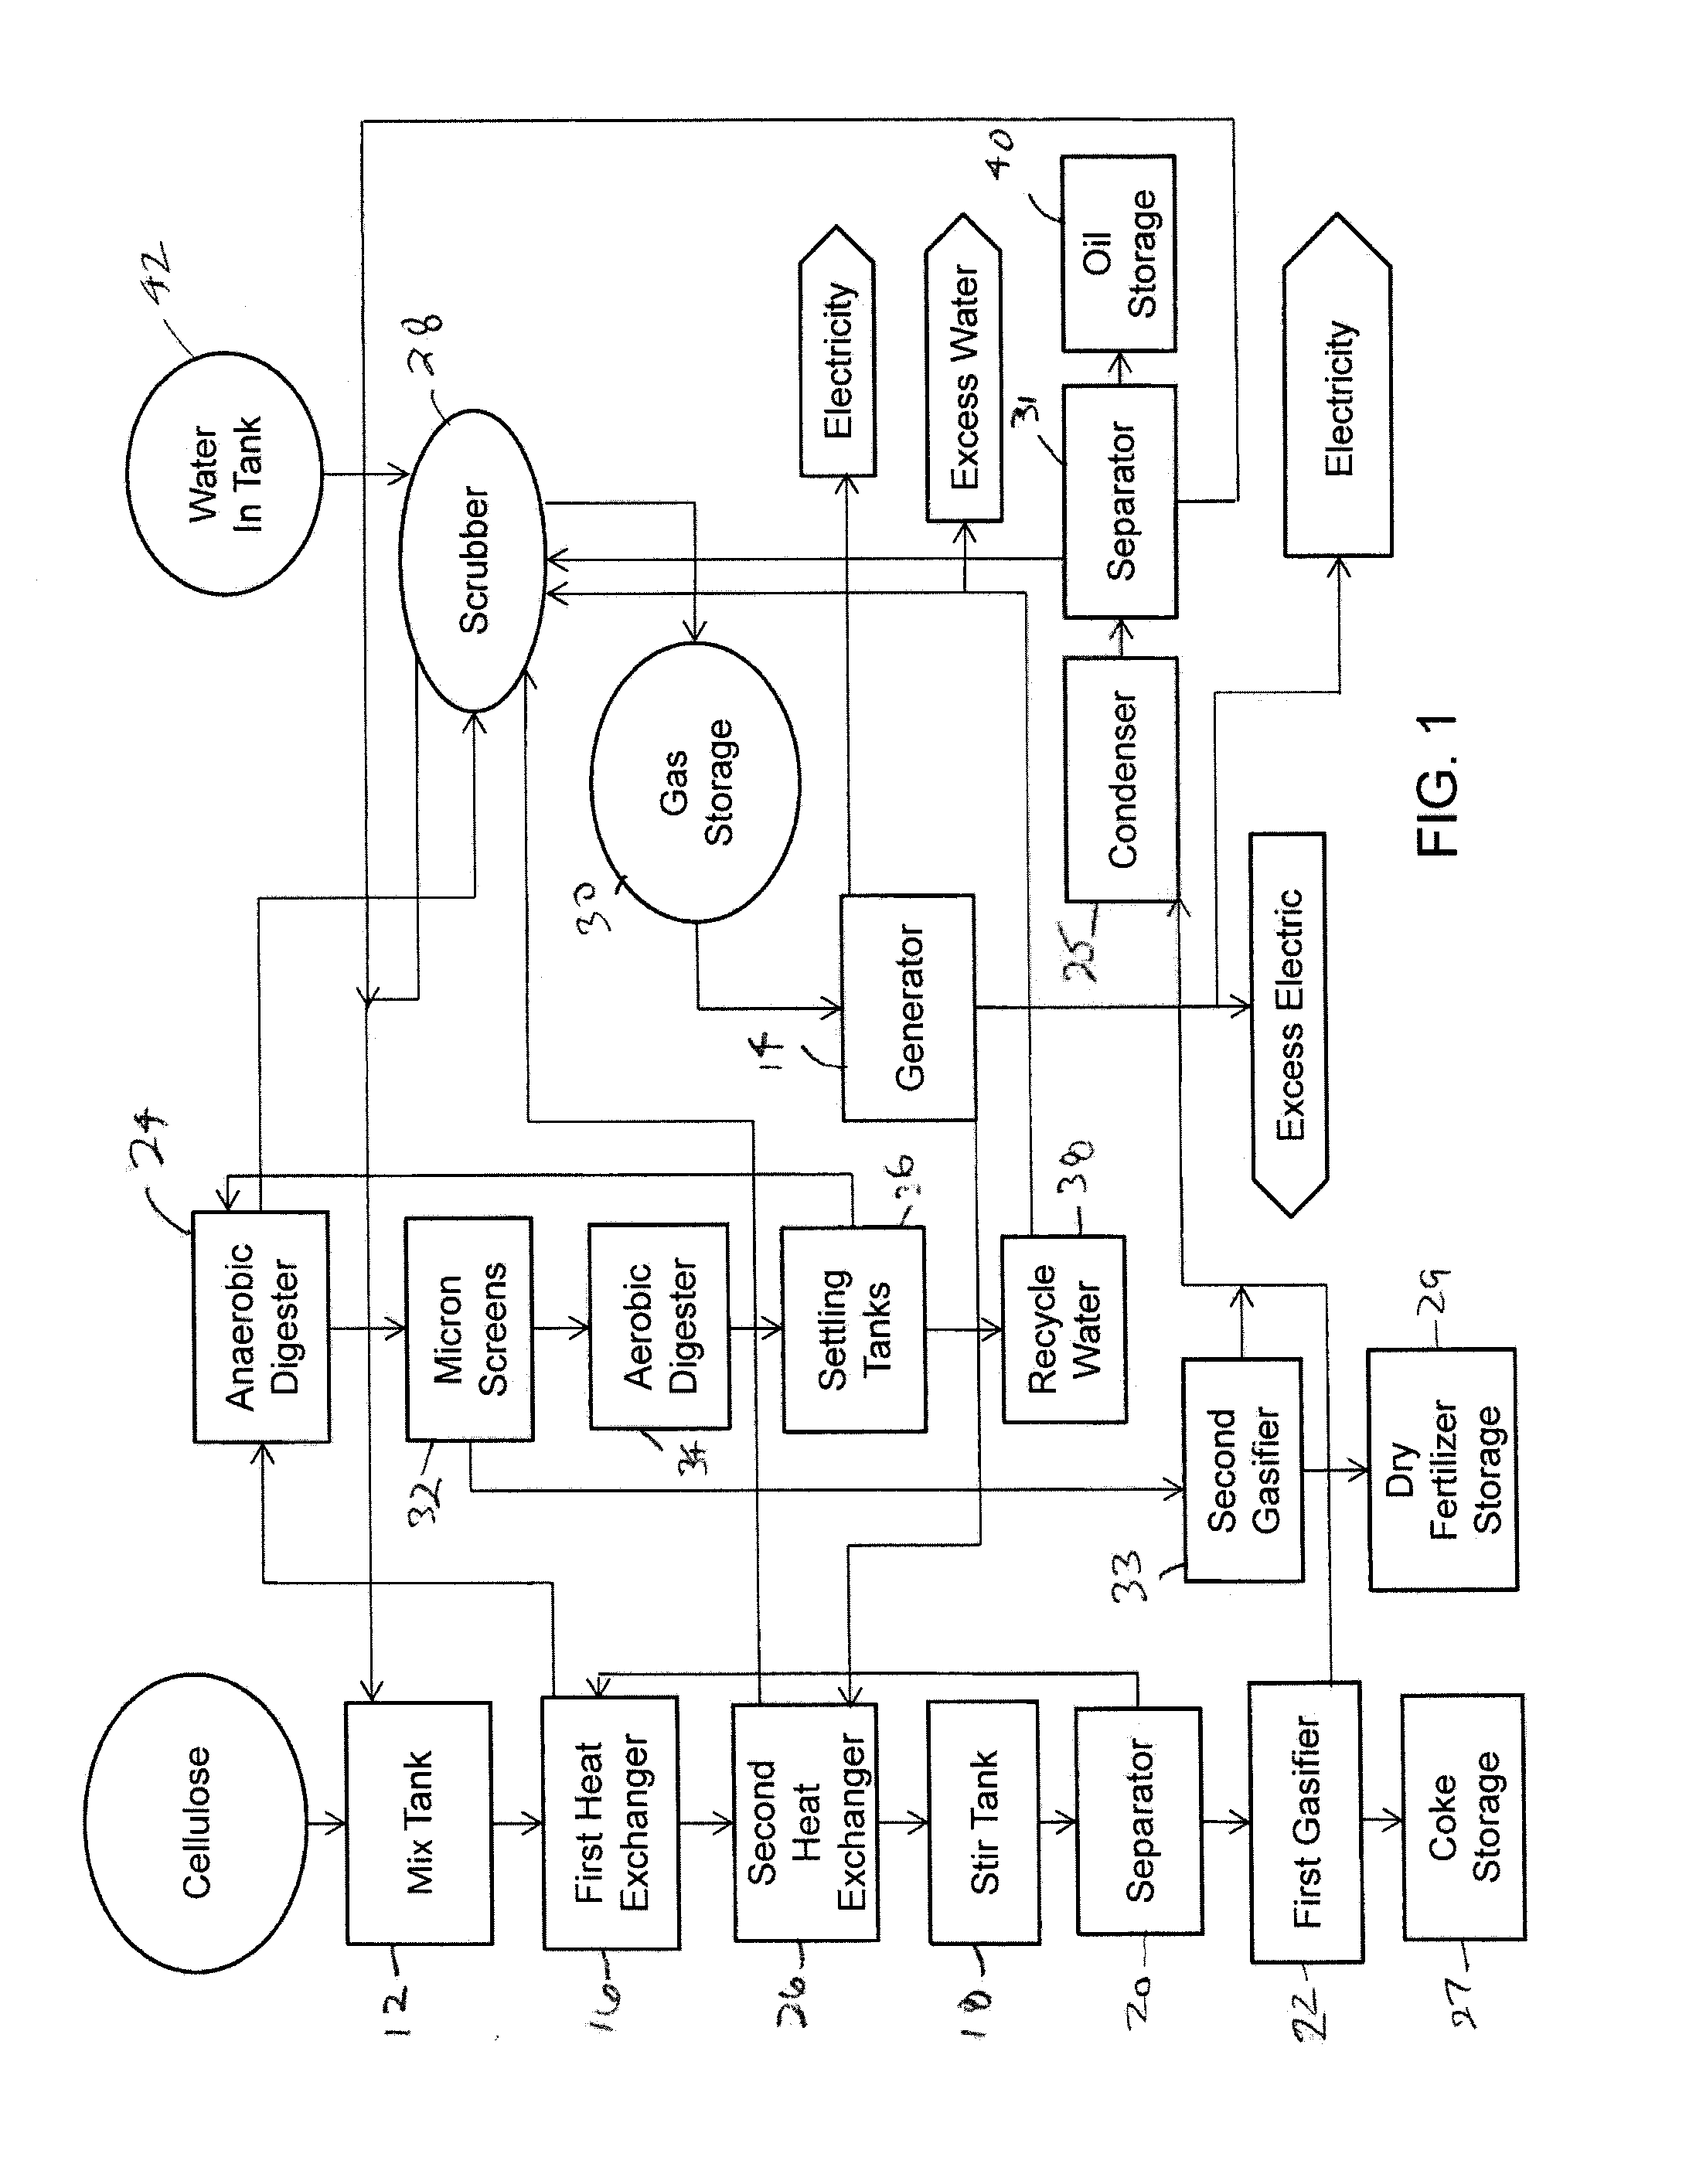 Method and Apparatus for Producing Engineered Fuel from High Cellulose Feedstock